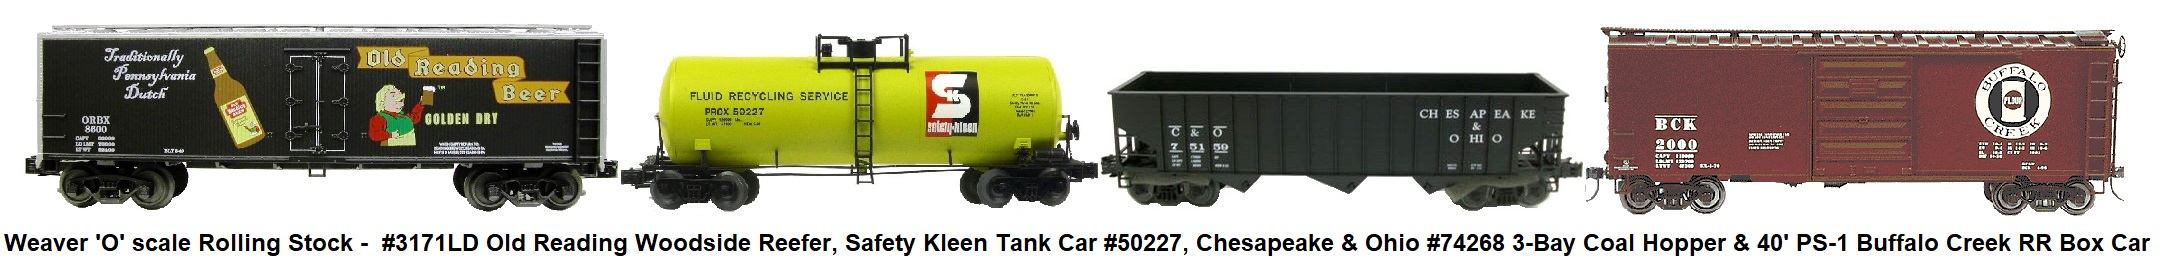 Weaver 'O' scale freight cars - includes #3171LD Old Reading Woodside Reefer, Safety Kleen Tank Car #50227, Chesapeake & Ohio #74268 3-Bay Coal Hopper, and 40' PS-1 Buffalo Creek RR Box Car